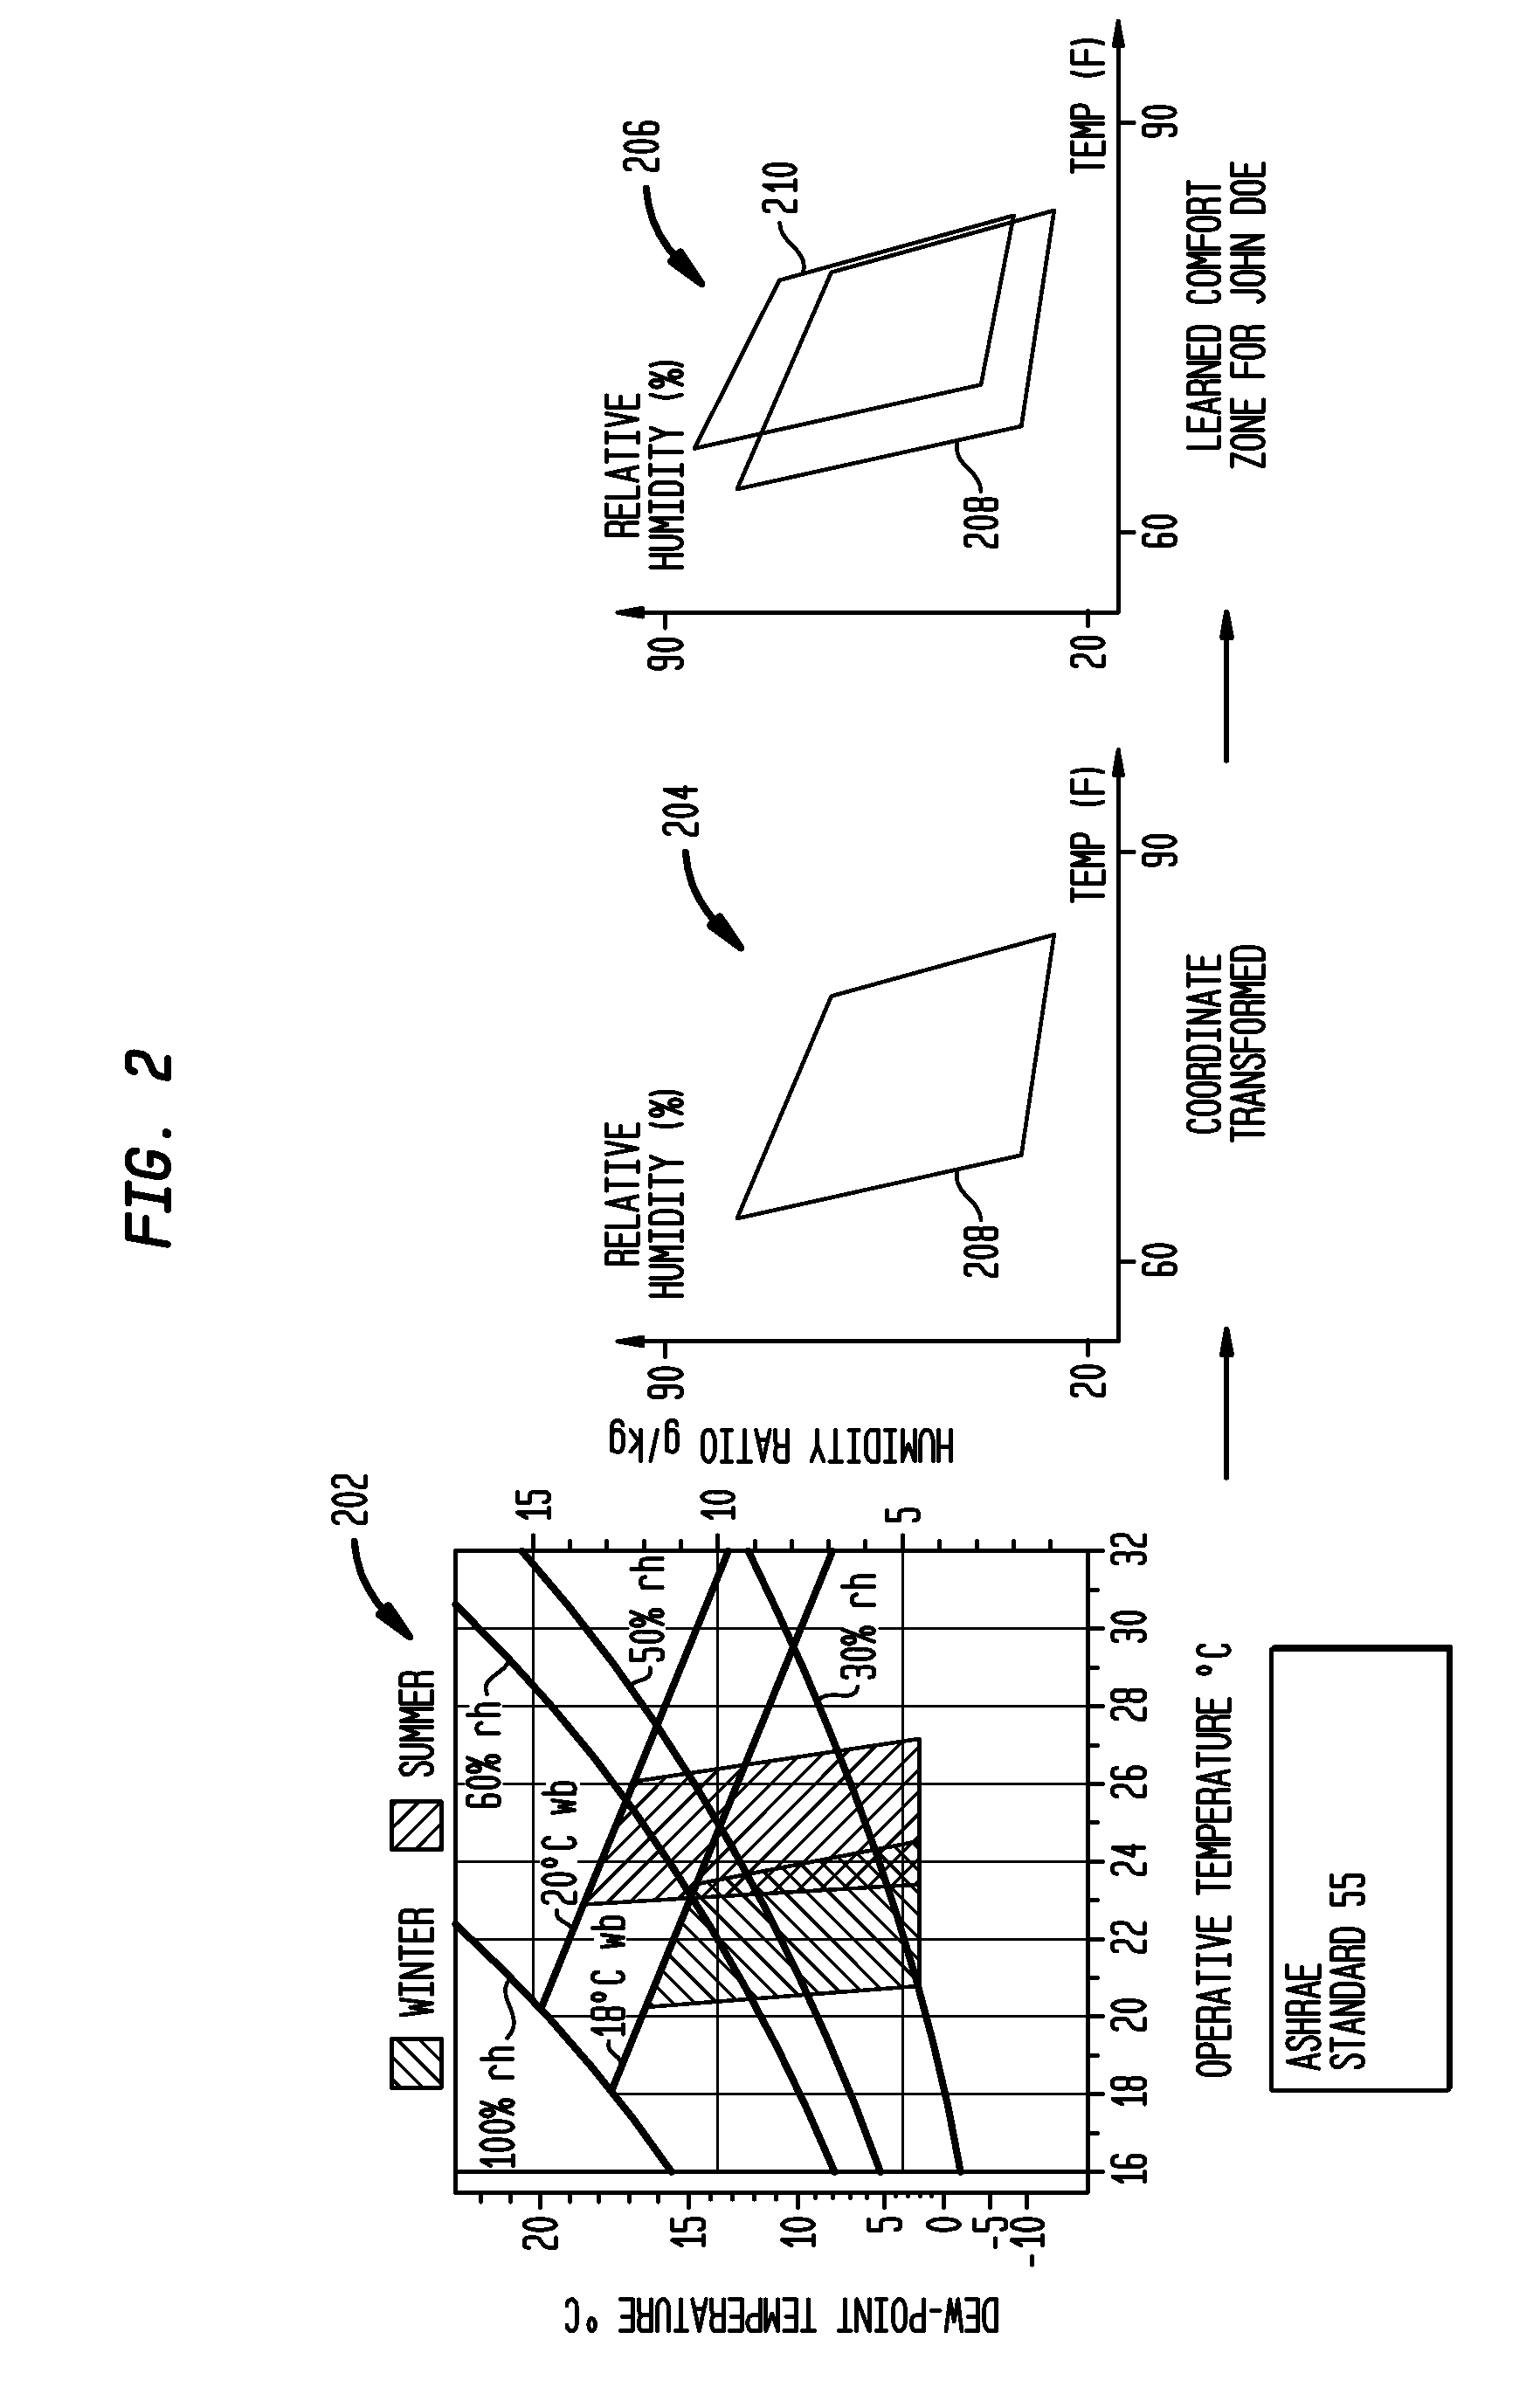 System and method for climate control set-point optimization based on individual comfort